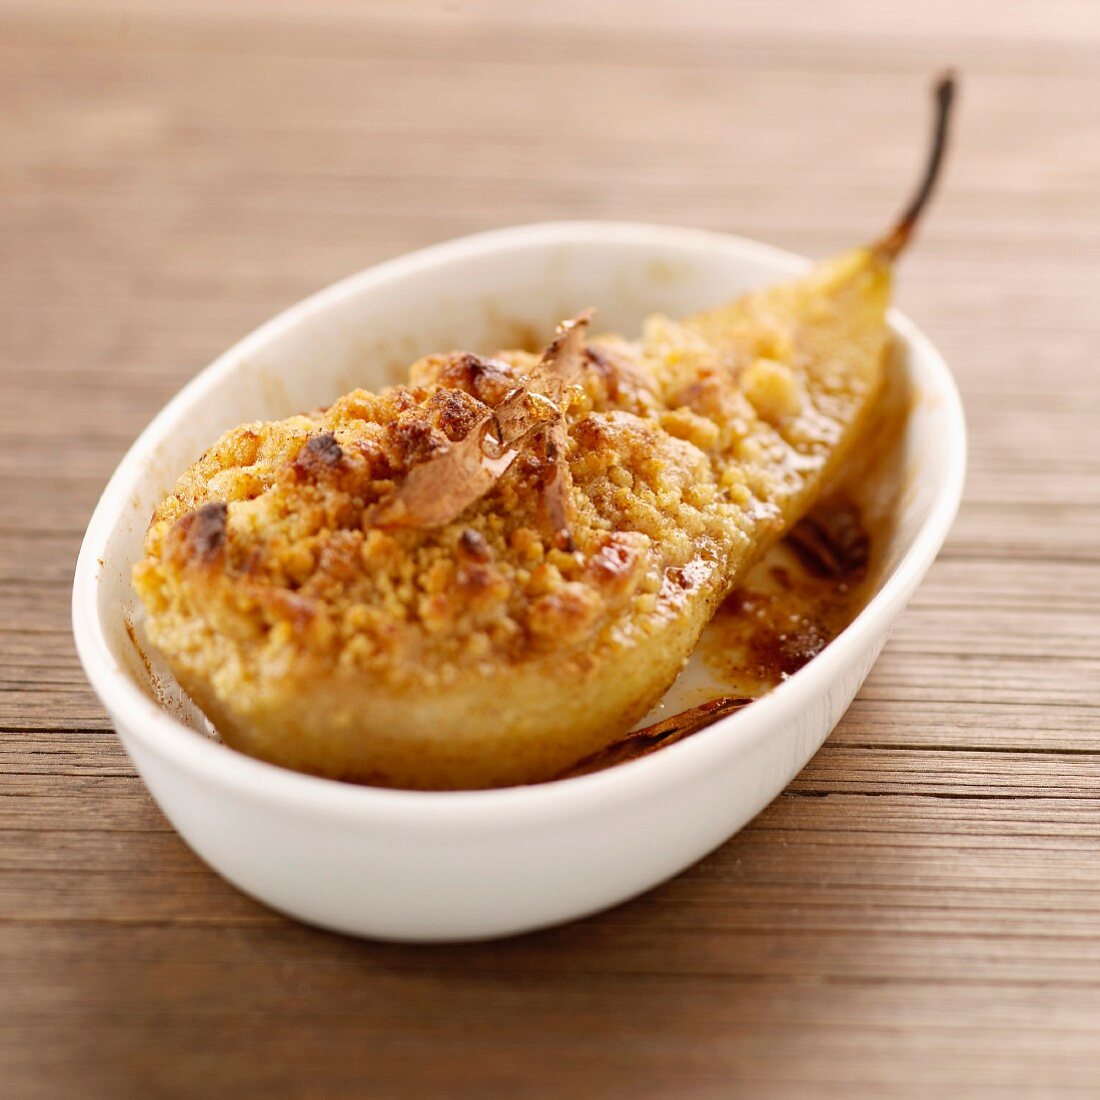 Roasted pear garnished with spicy crumble